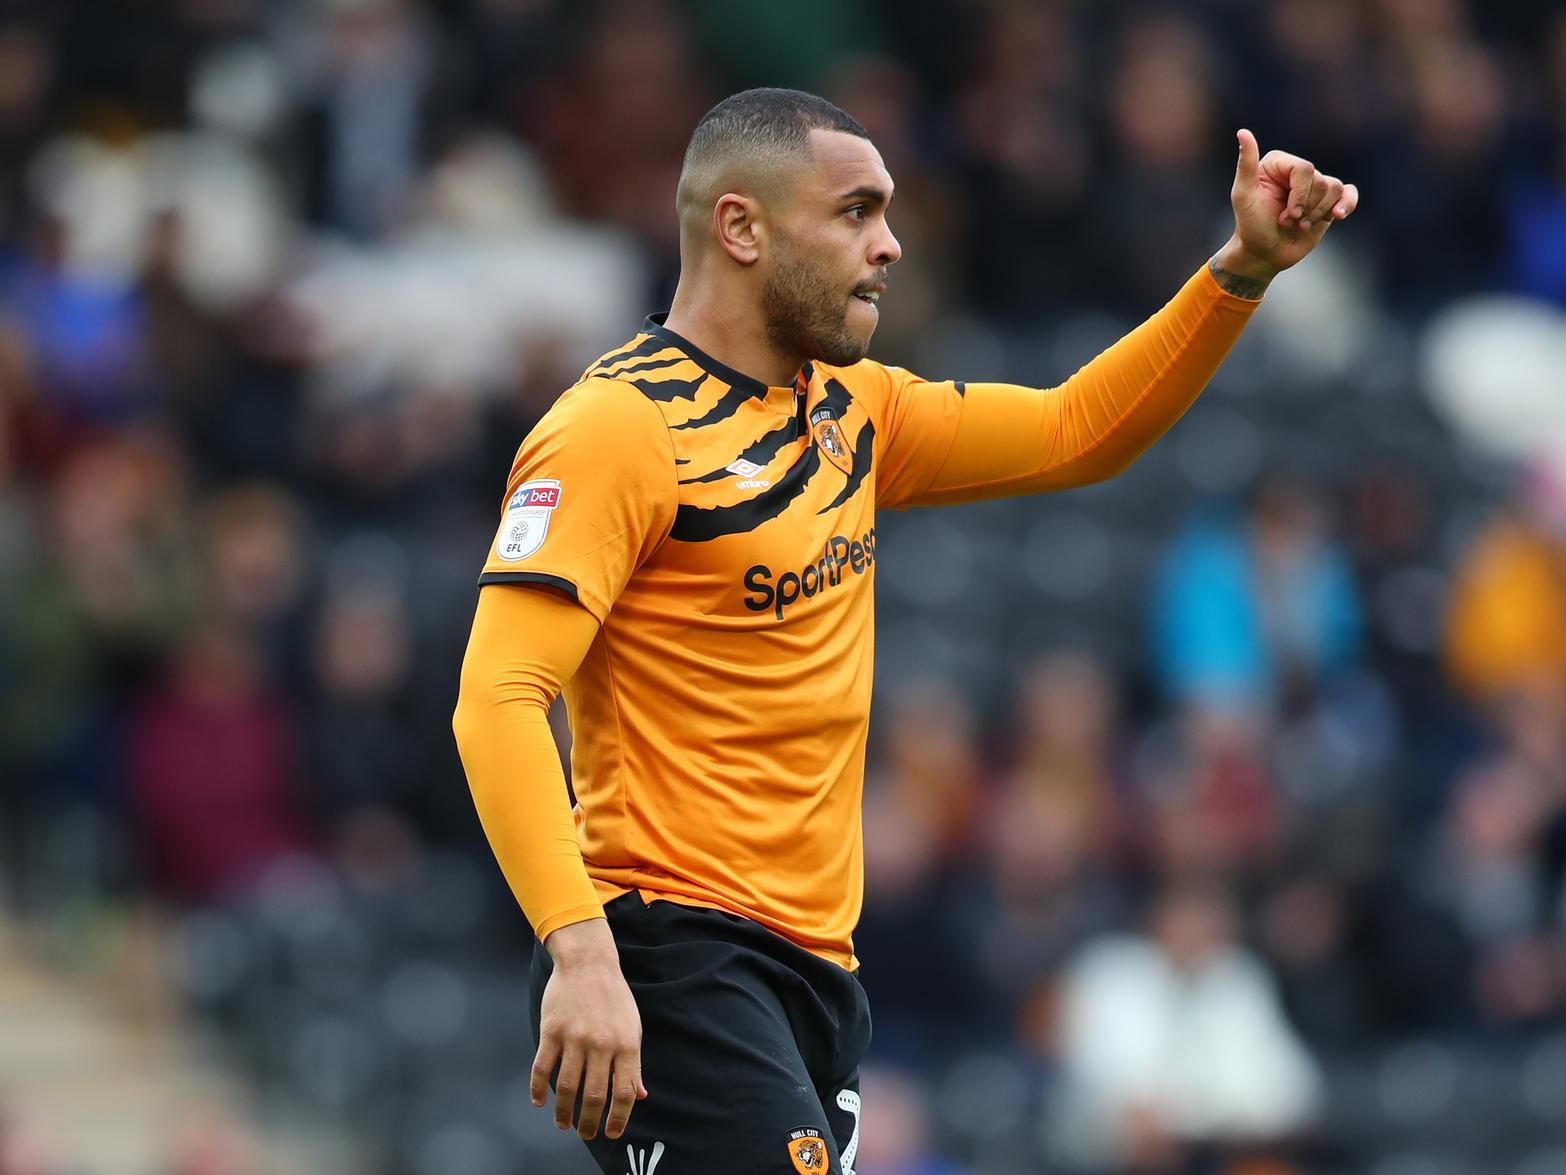 Hull City's Josh Magennis has backed new wing duoMarcus Maddison and Mallik Wilks to fill the void left by the exit ofJarrod Bowen and Kamil Grosicki, claiming their relentless crossing will lead to more goals. (Hull Daily Mail)